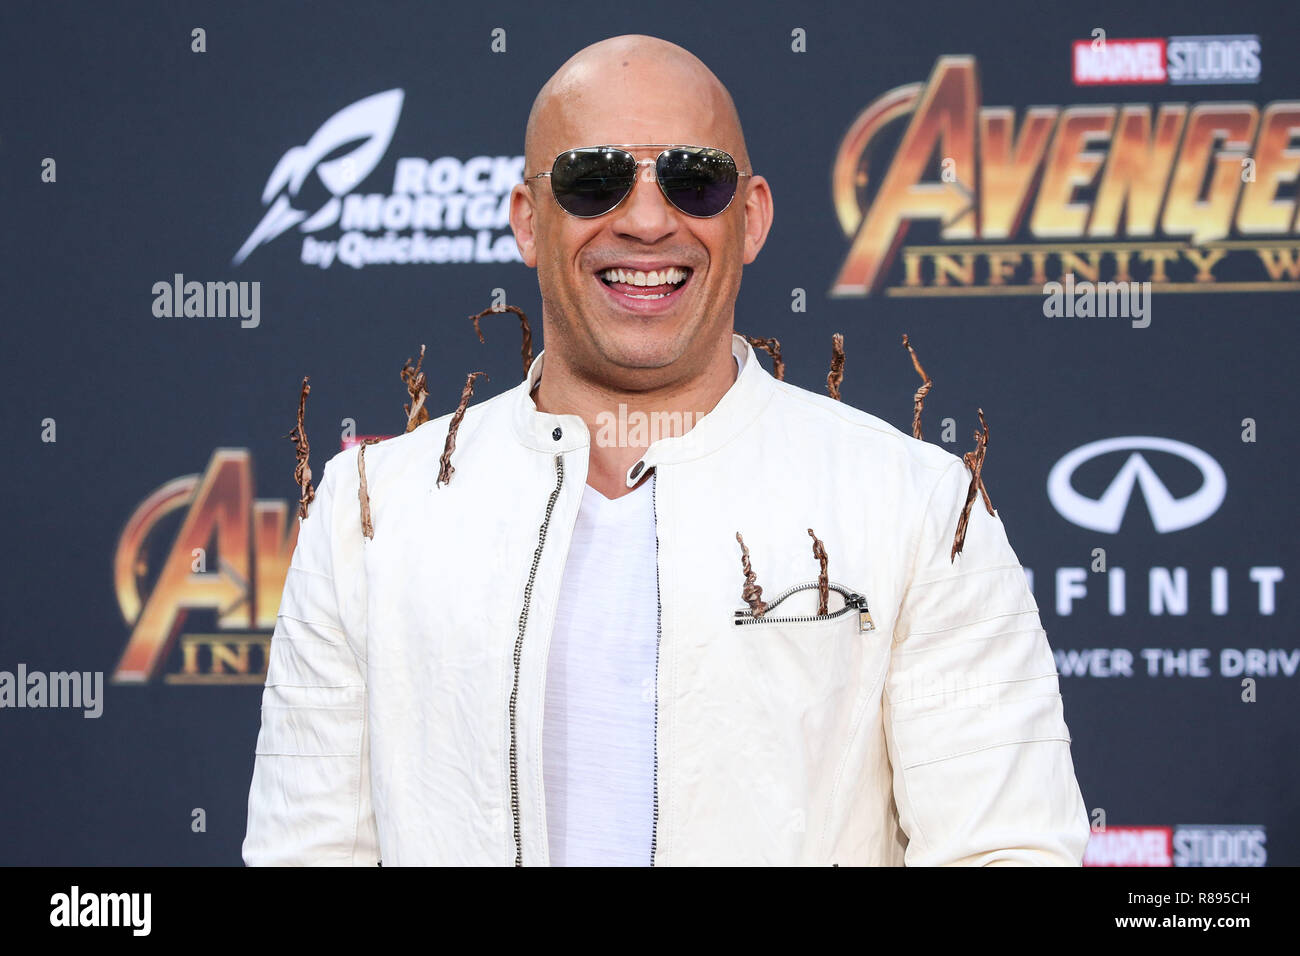 HOLLYWOOD, LOS ANGELES, CA, USA - APRIL 23: Vin Diesel at the World Premiere Of Disney And Marvel's 'Avengers: Infinity War' held at the El Capitan Theatre, Dolby Theatre and TCL Chinese Theatre IMAX on April 23, 2018 in Hollywood, Los Angeles, California, United States. (Photo by Xavier Collin/Image Press Agency) Stock Photo